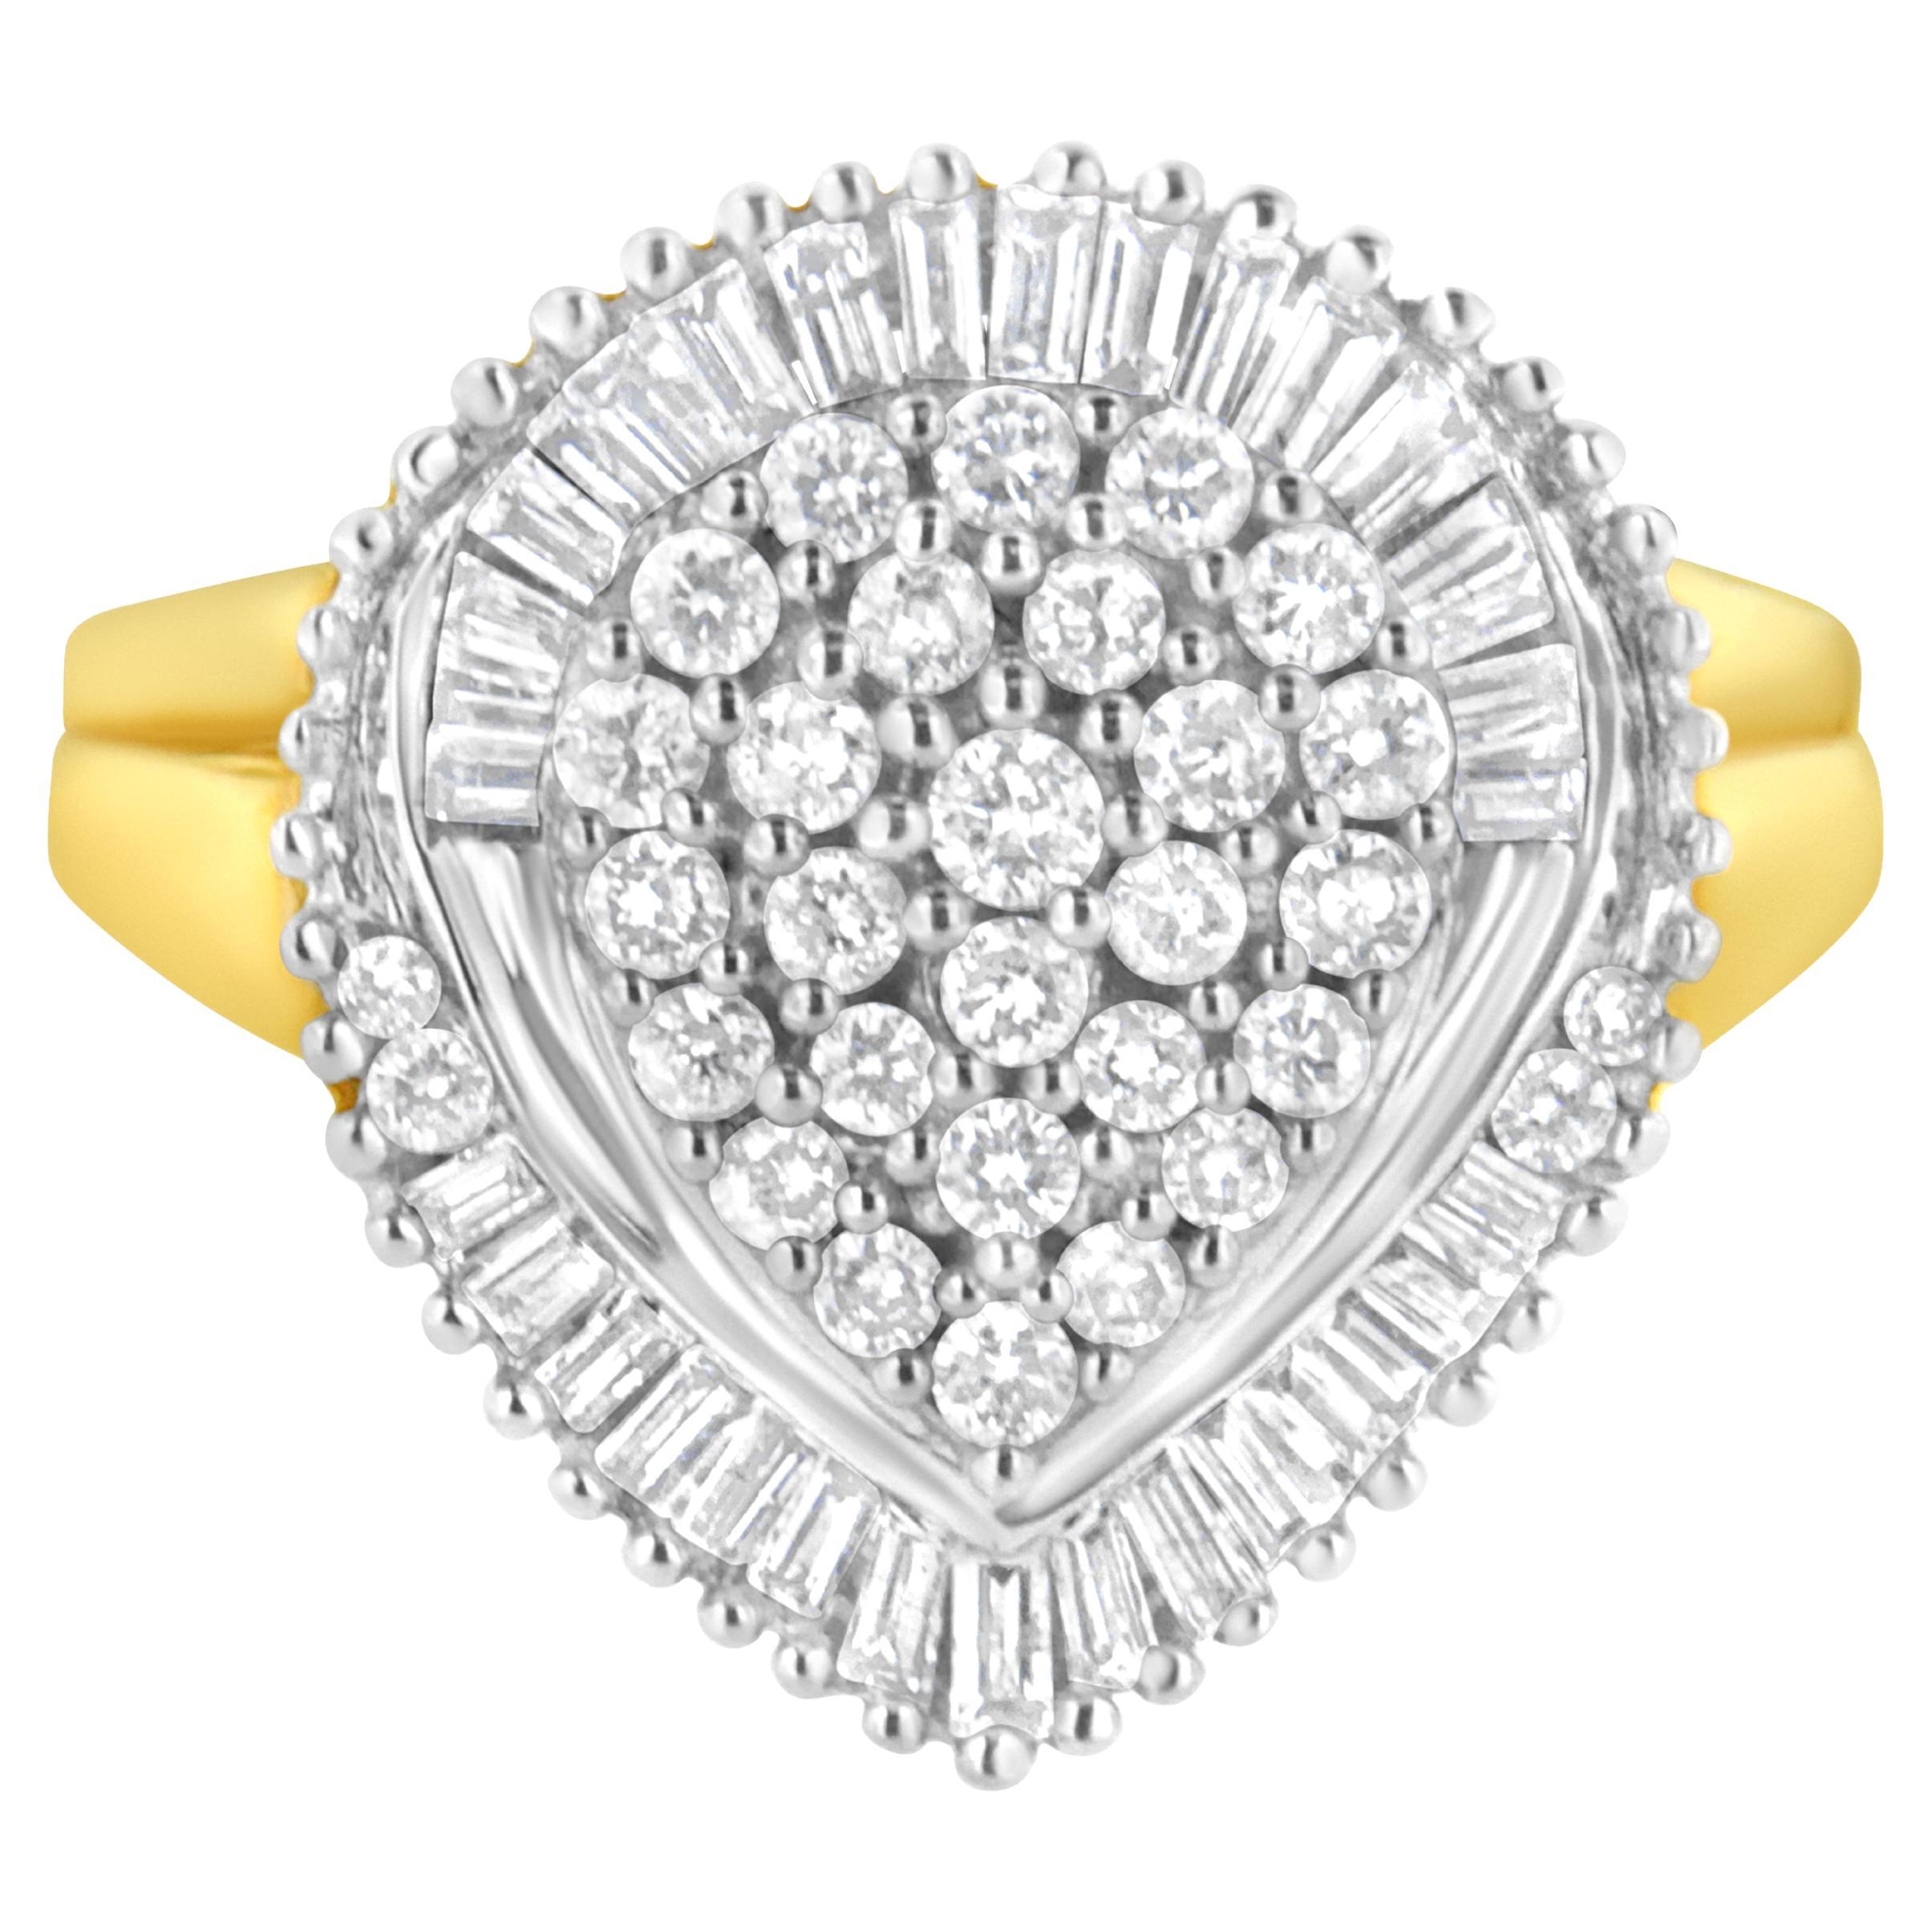 10K Yellow Gold 1.0 Cttw Round and Baguette Cut Diamond Oval Shaped Cluster Ring